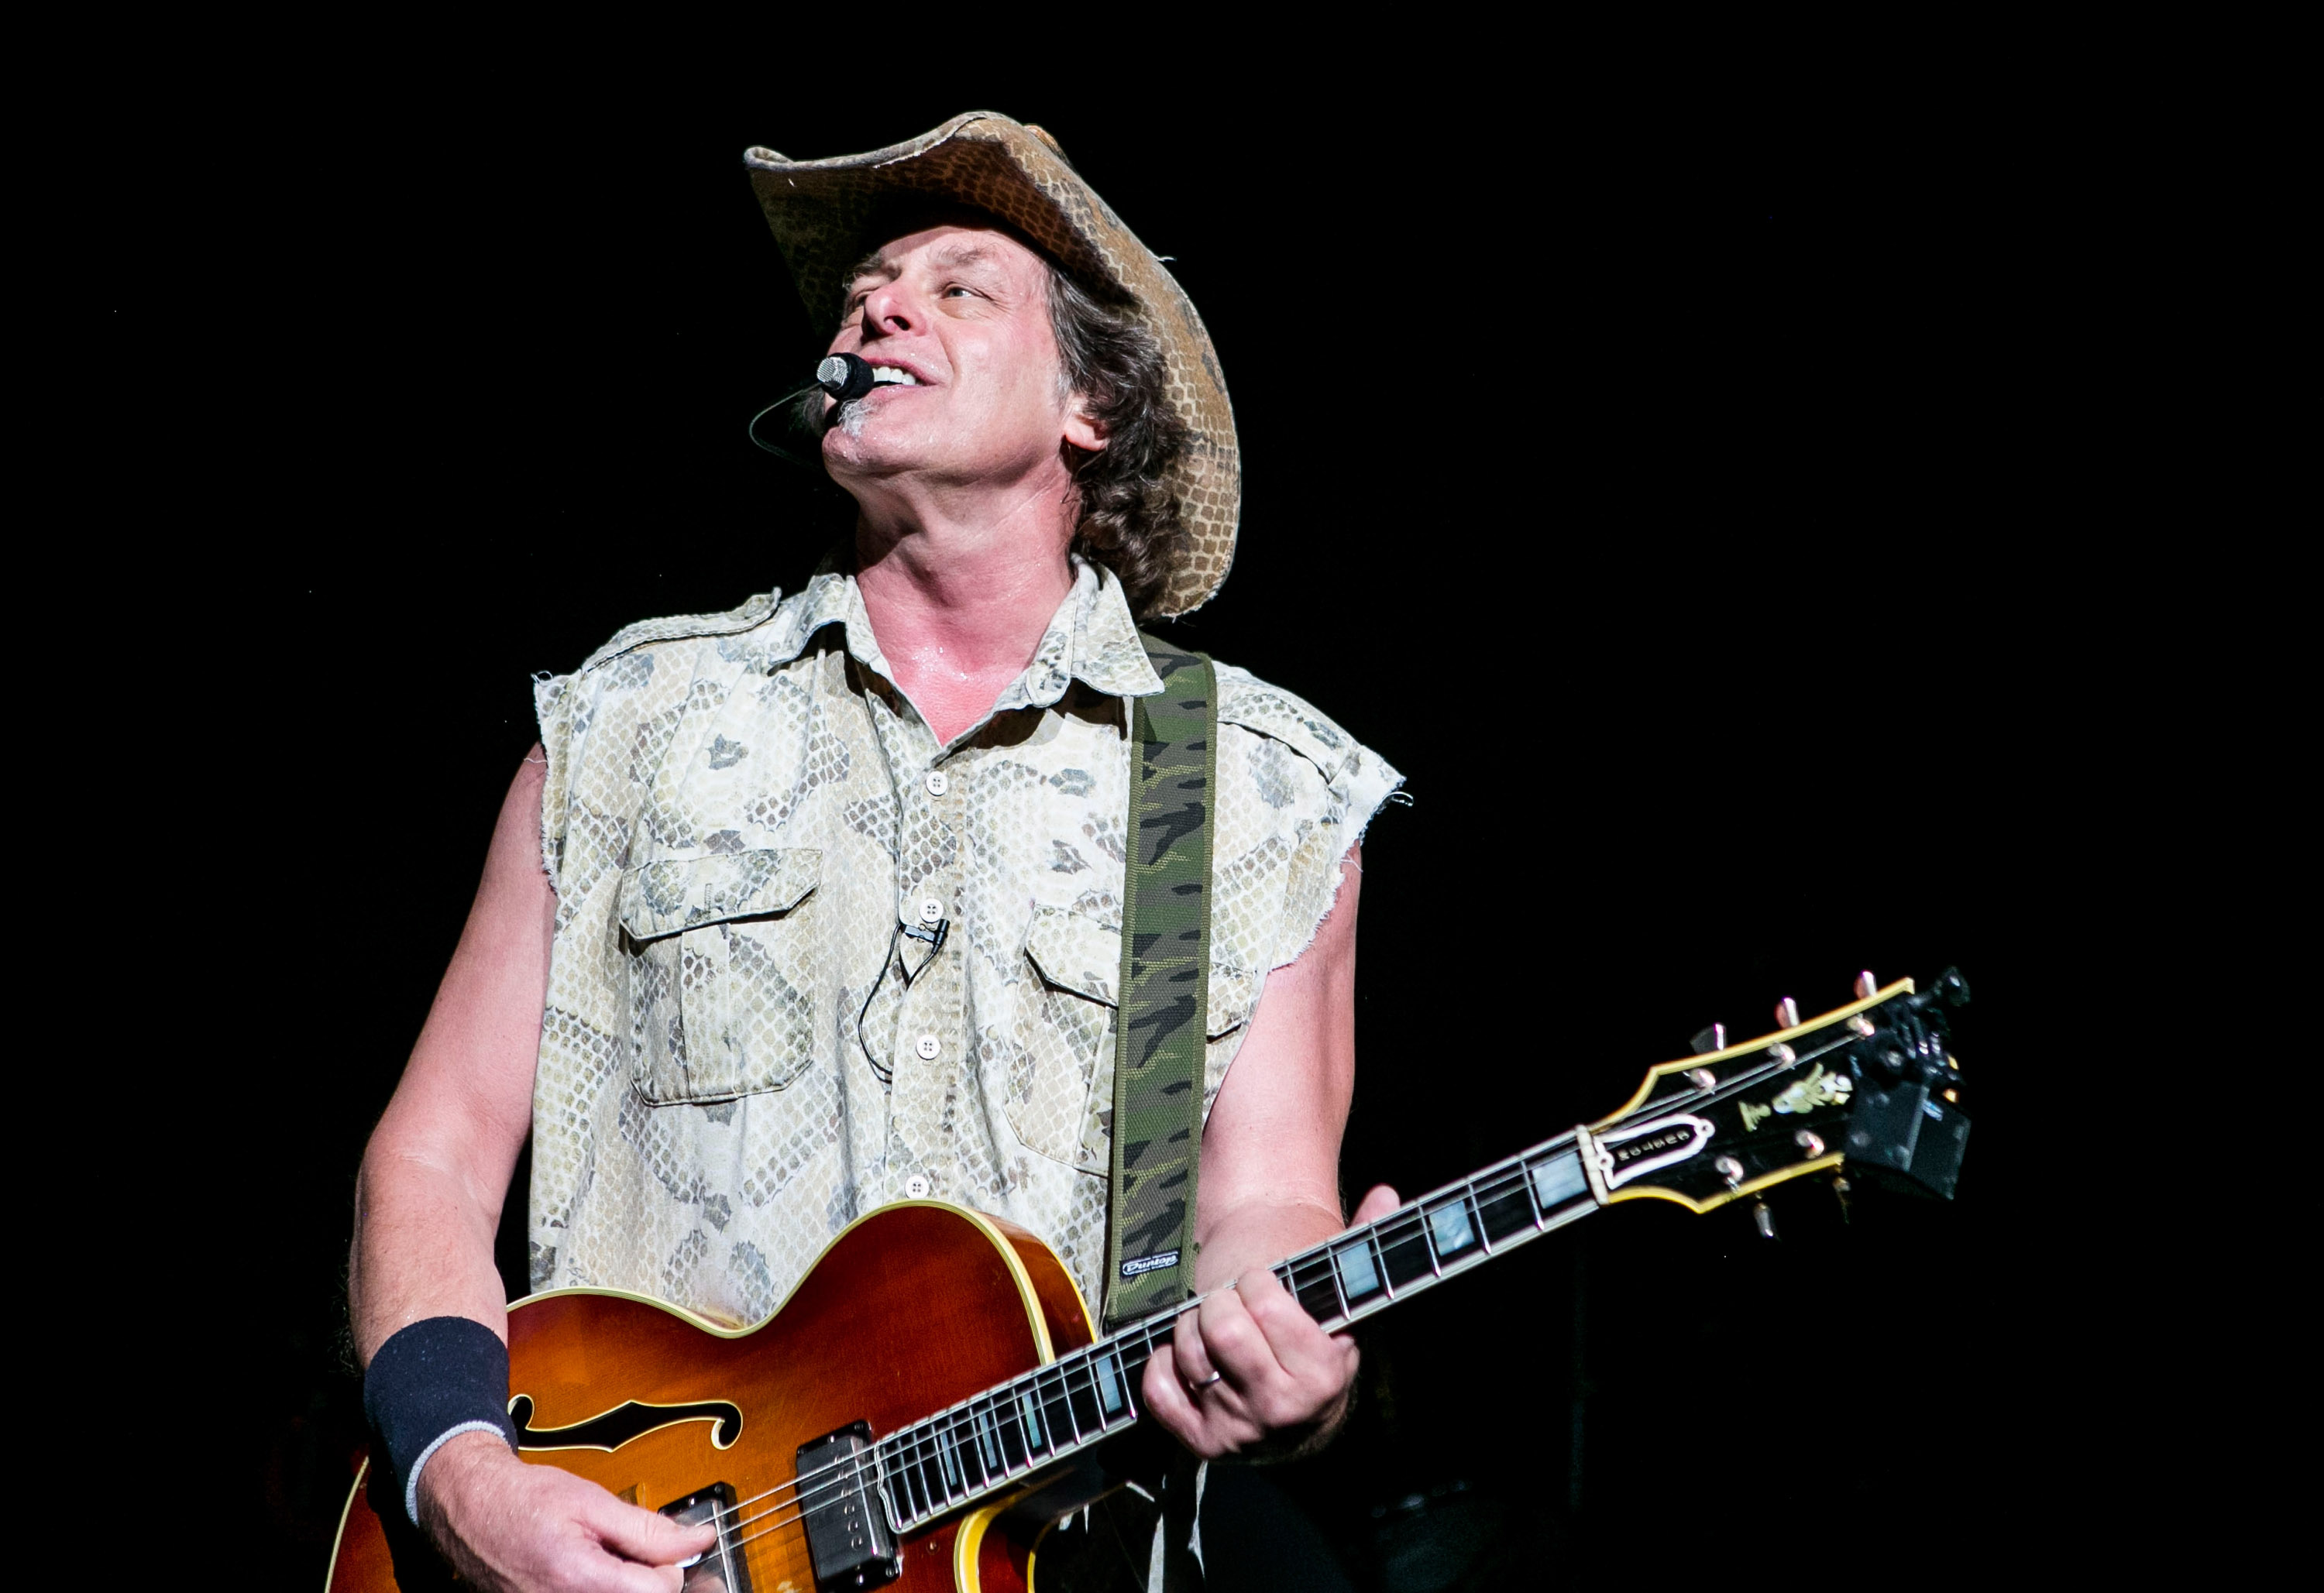 CLARKSTON, MI - JULY 19:  Ted Nugent performs at DTE Energy Music Theater on July 19, 2014 in Clarkston, Michigan.  (Photo by